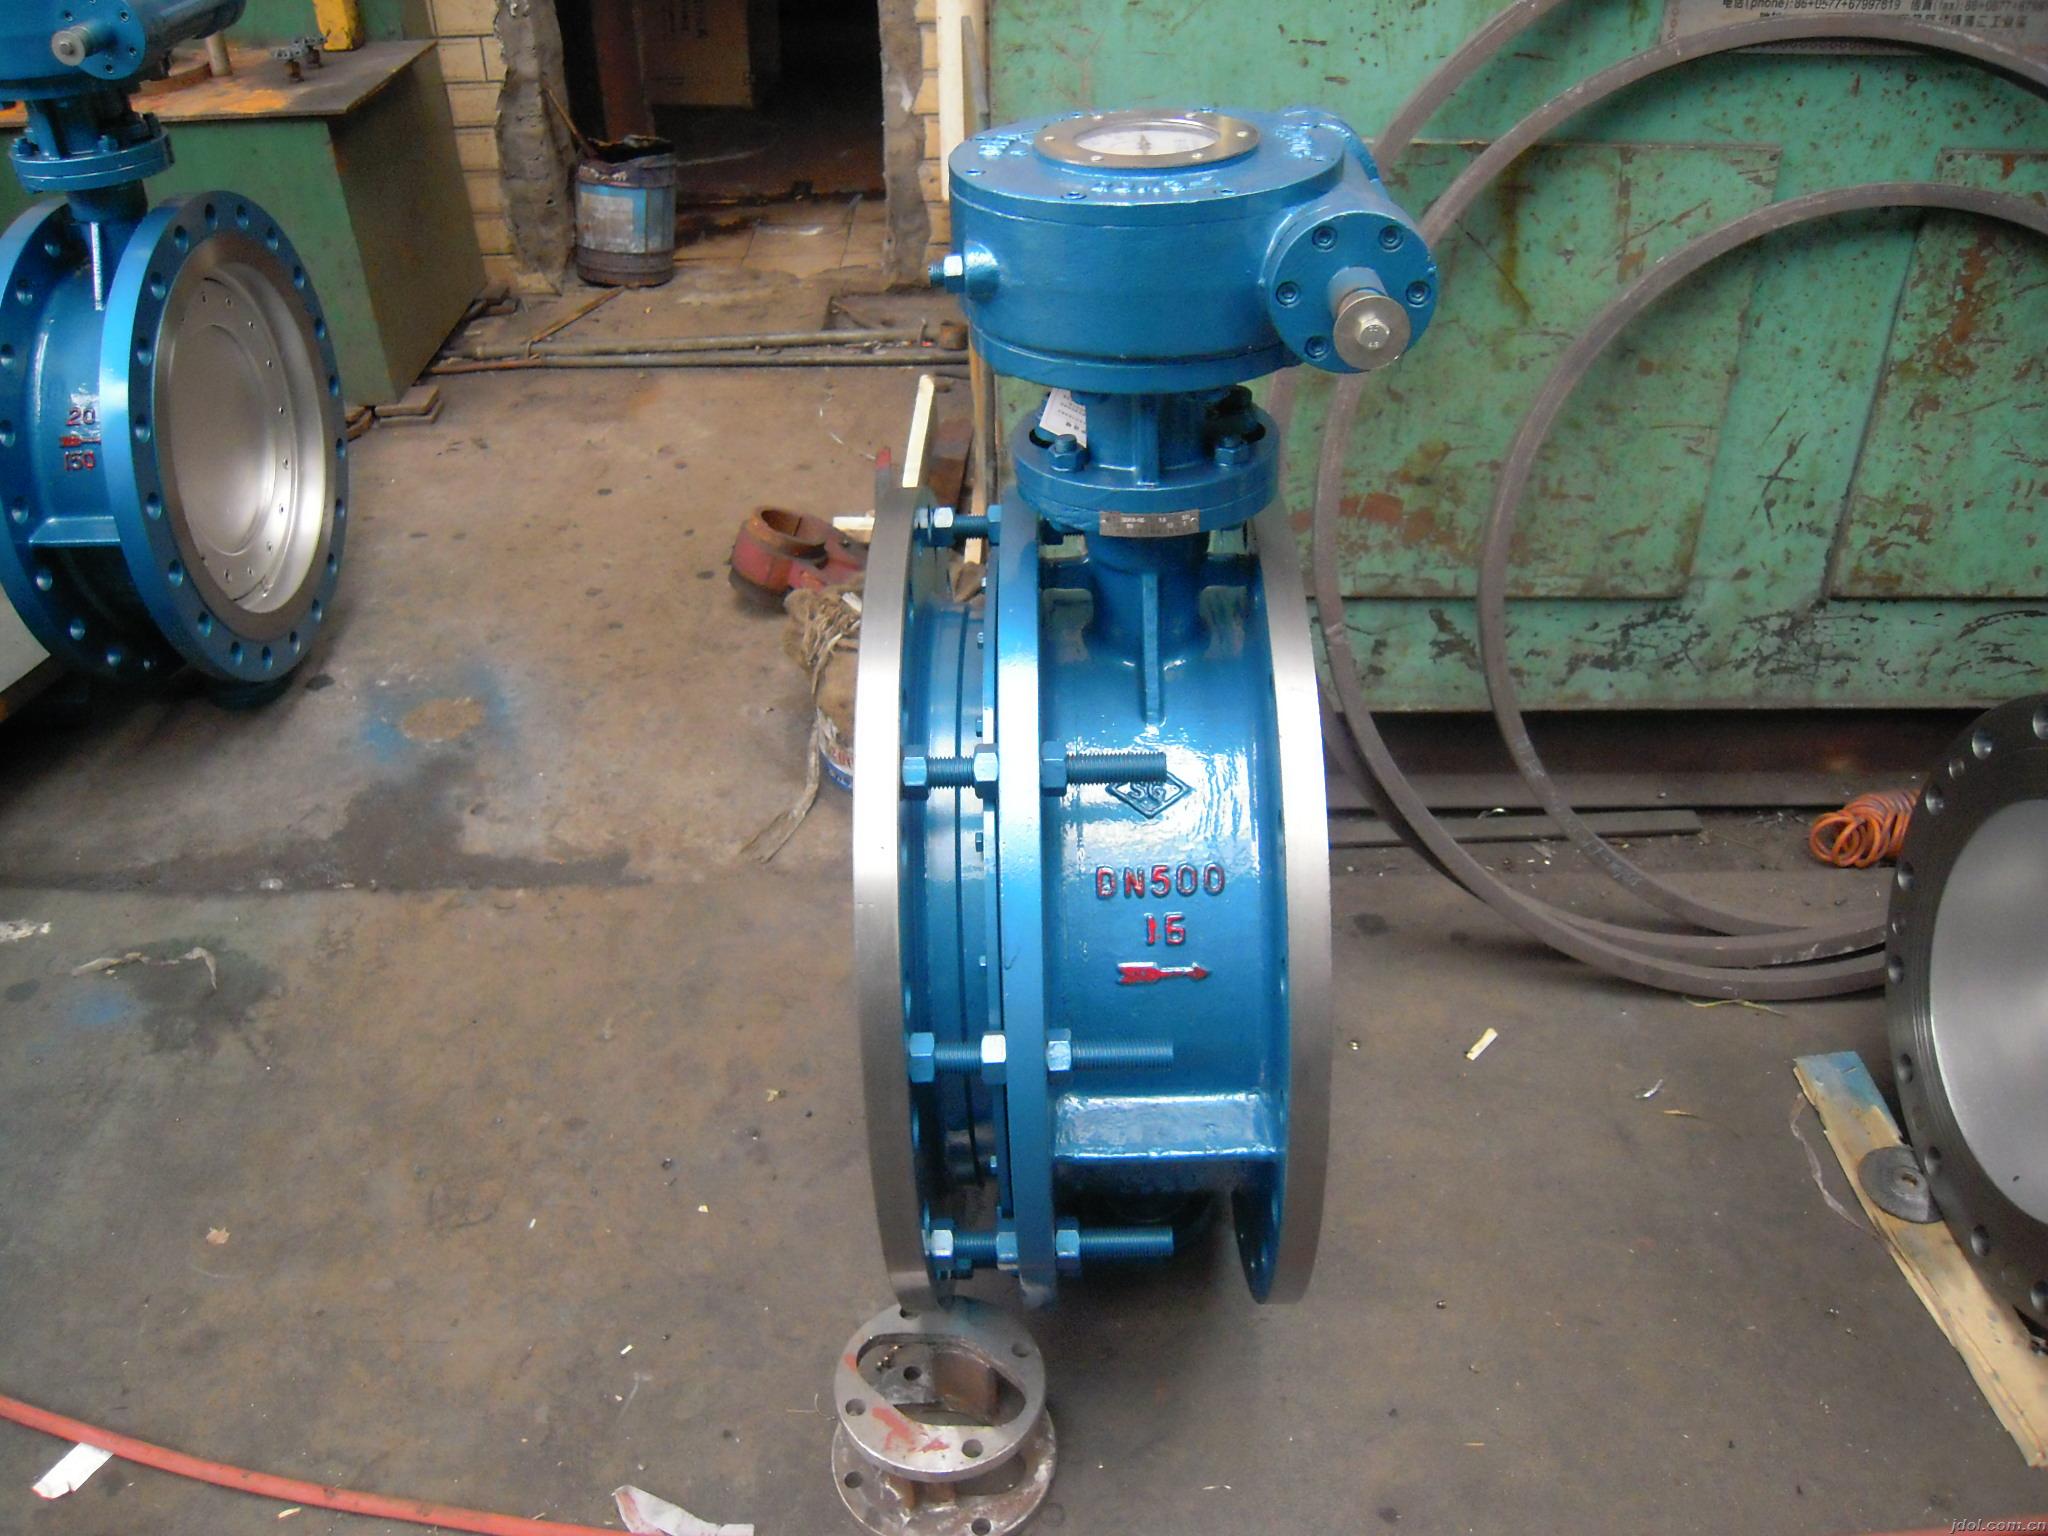 Flange Expansion Butterfly Valve